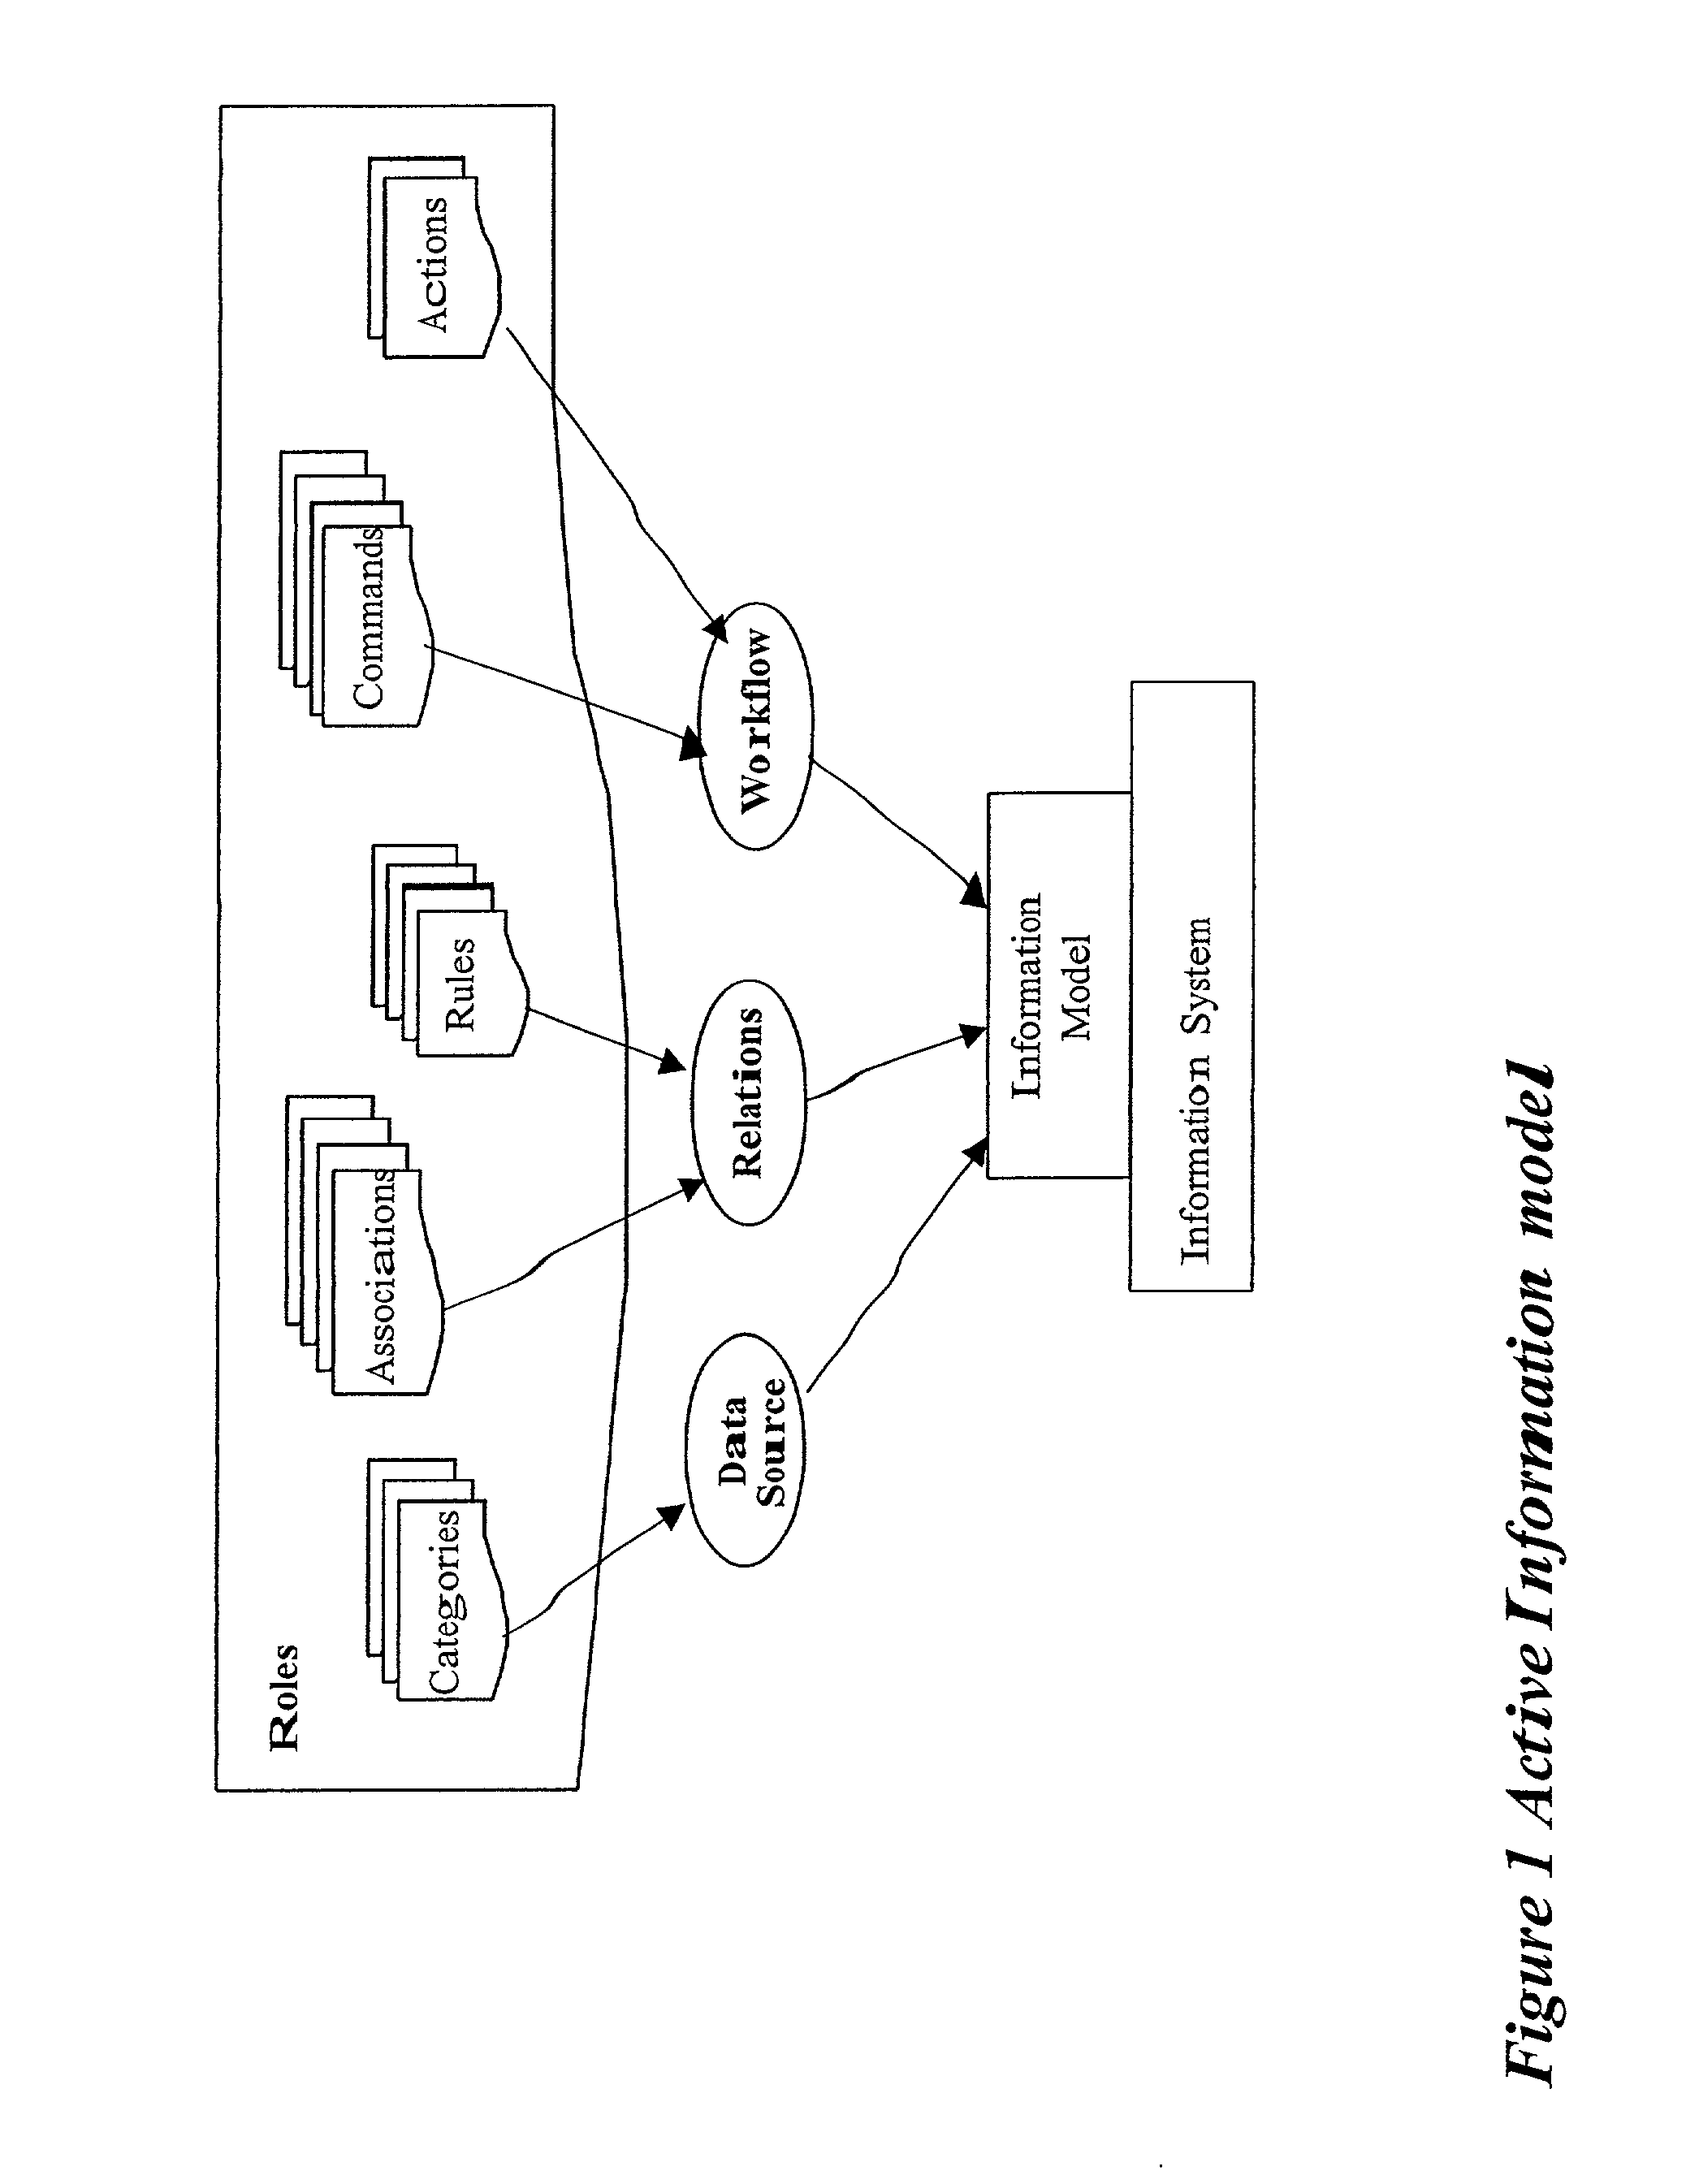 Method and apparatus for implementing an active information model